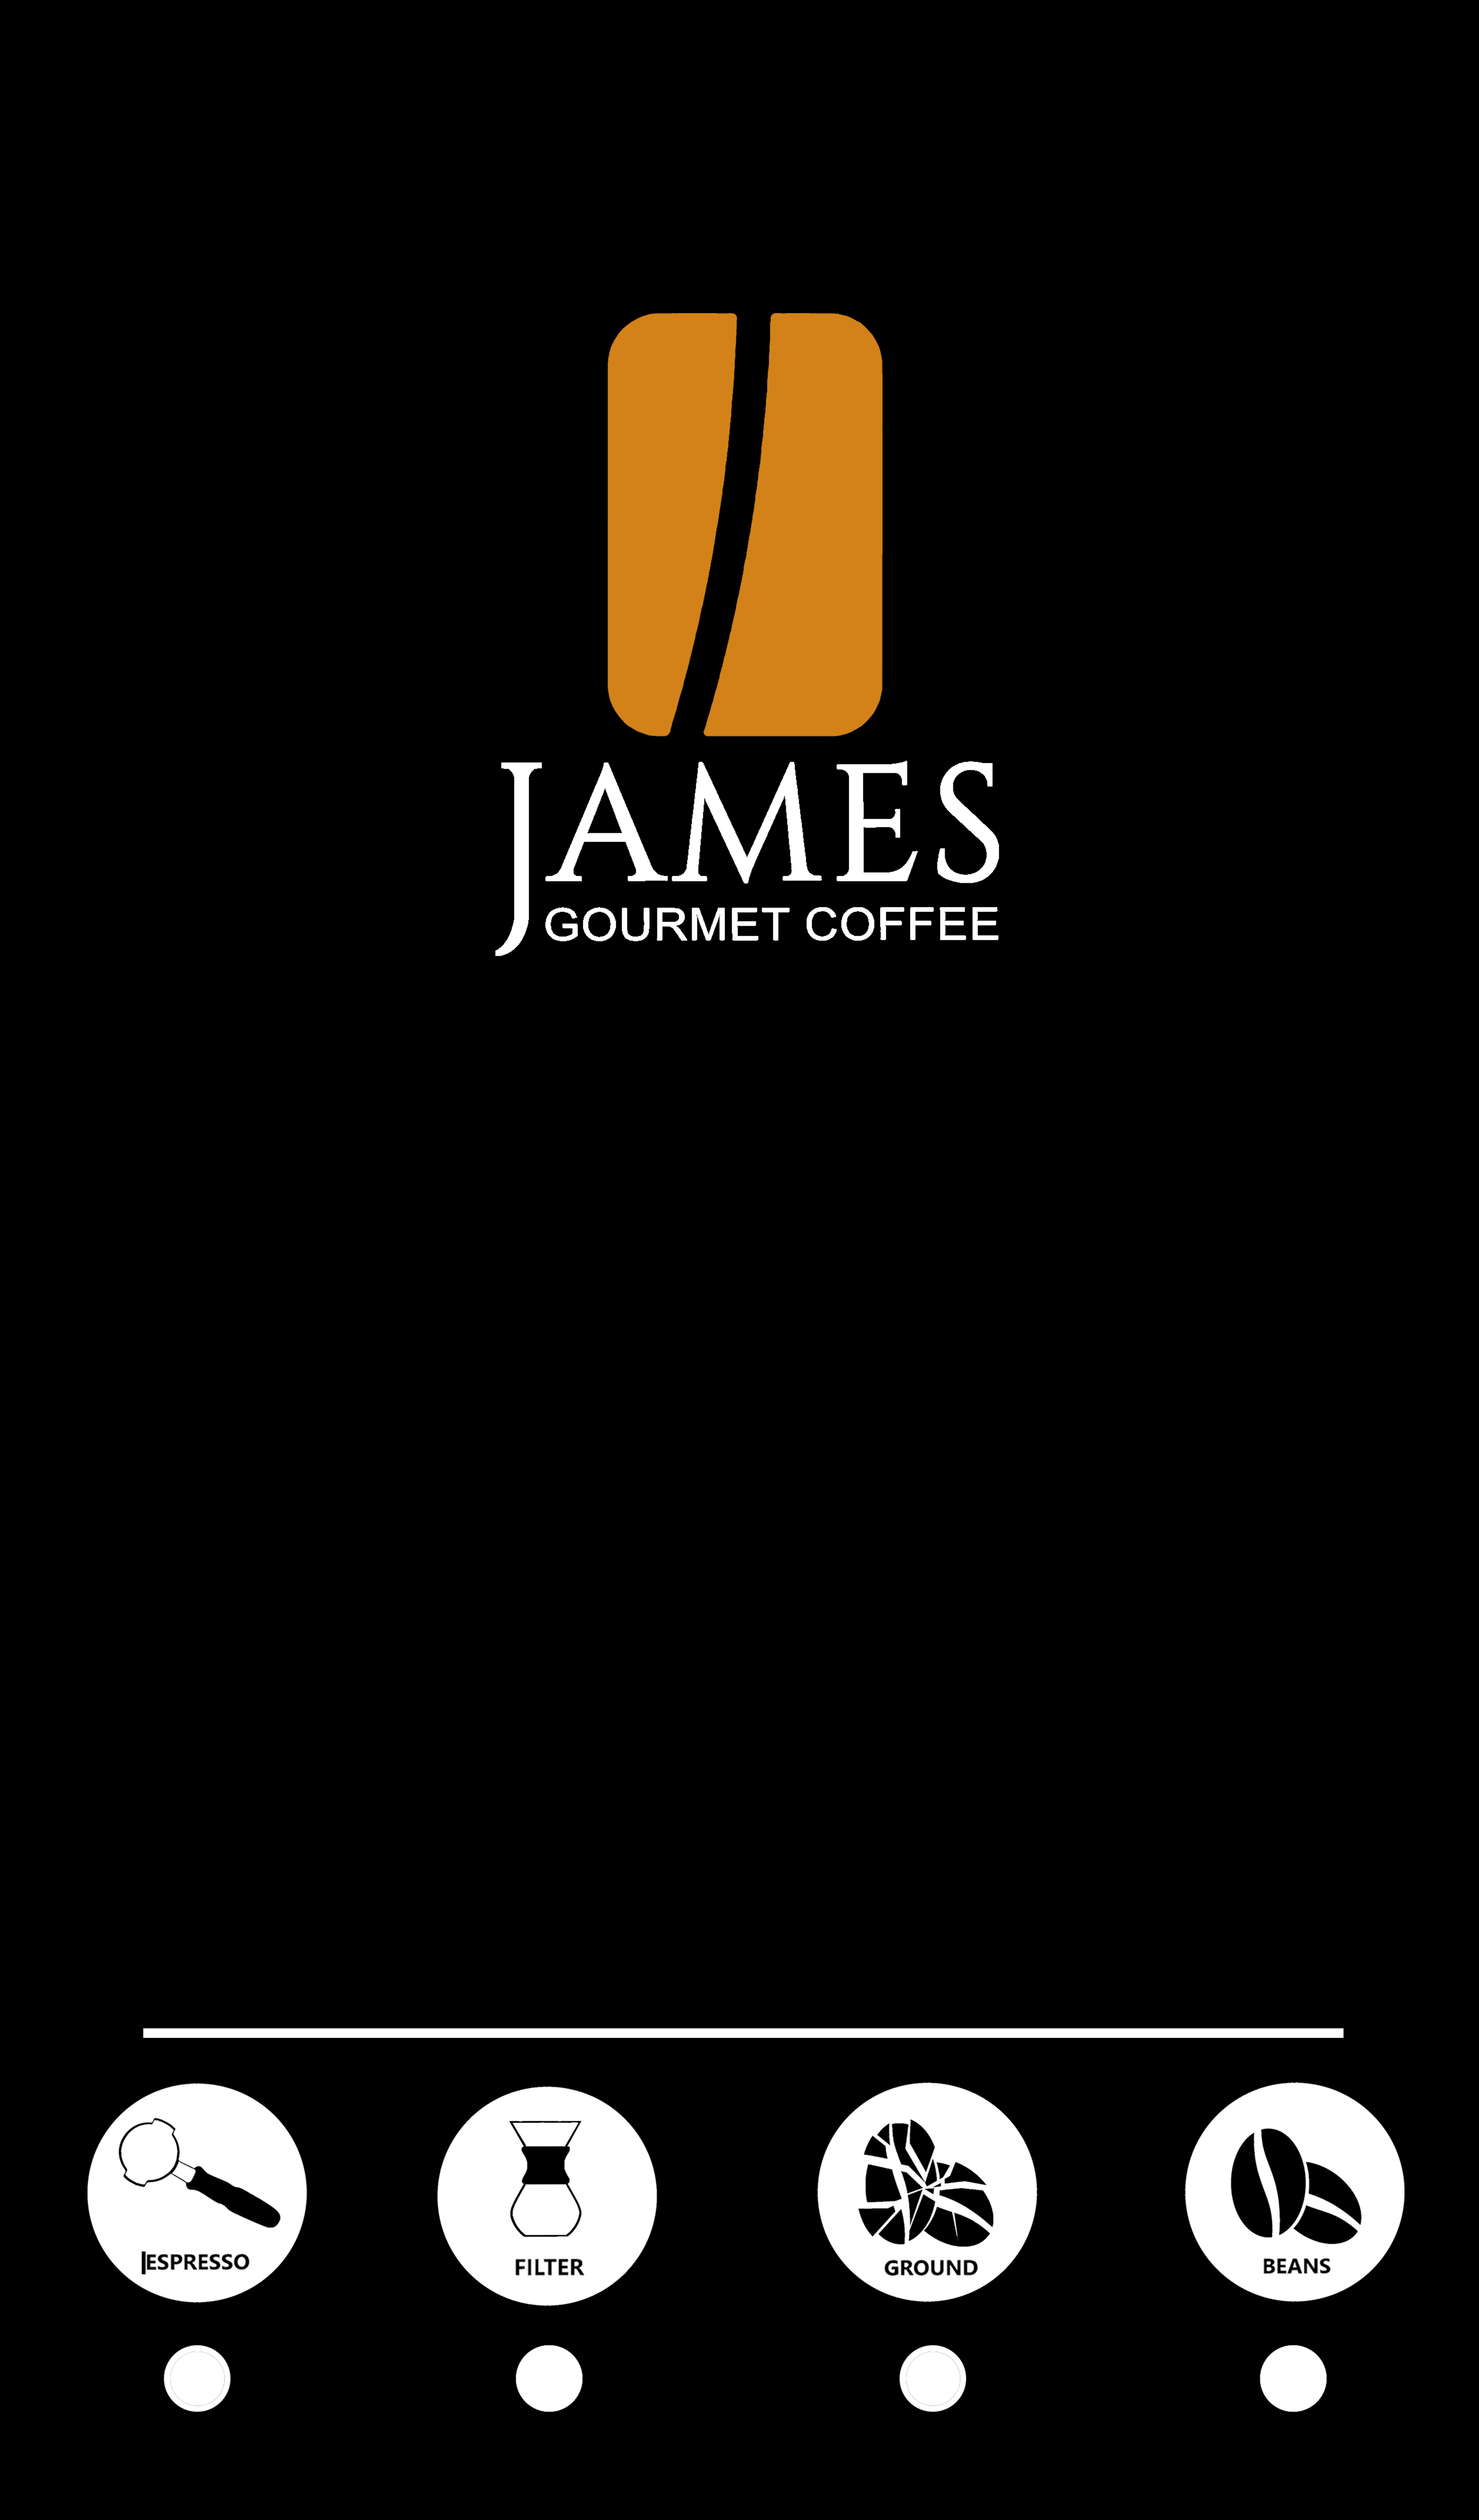 NEW JAMES GOURMET COFFEE 250g COFFEE BAG "FRONT"